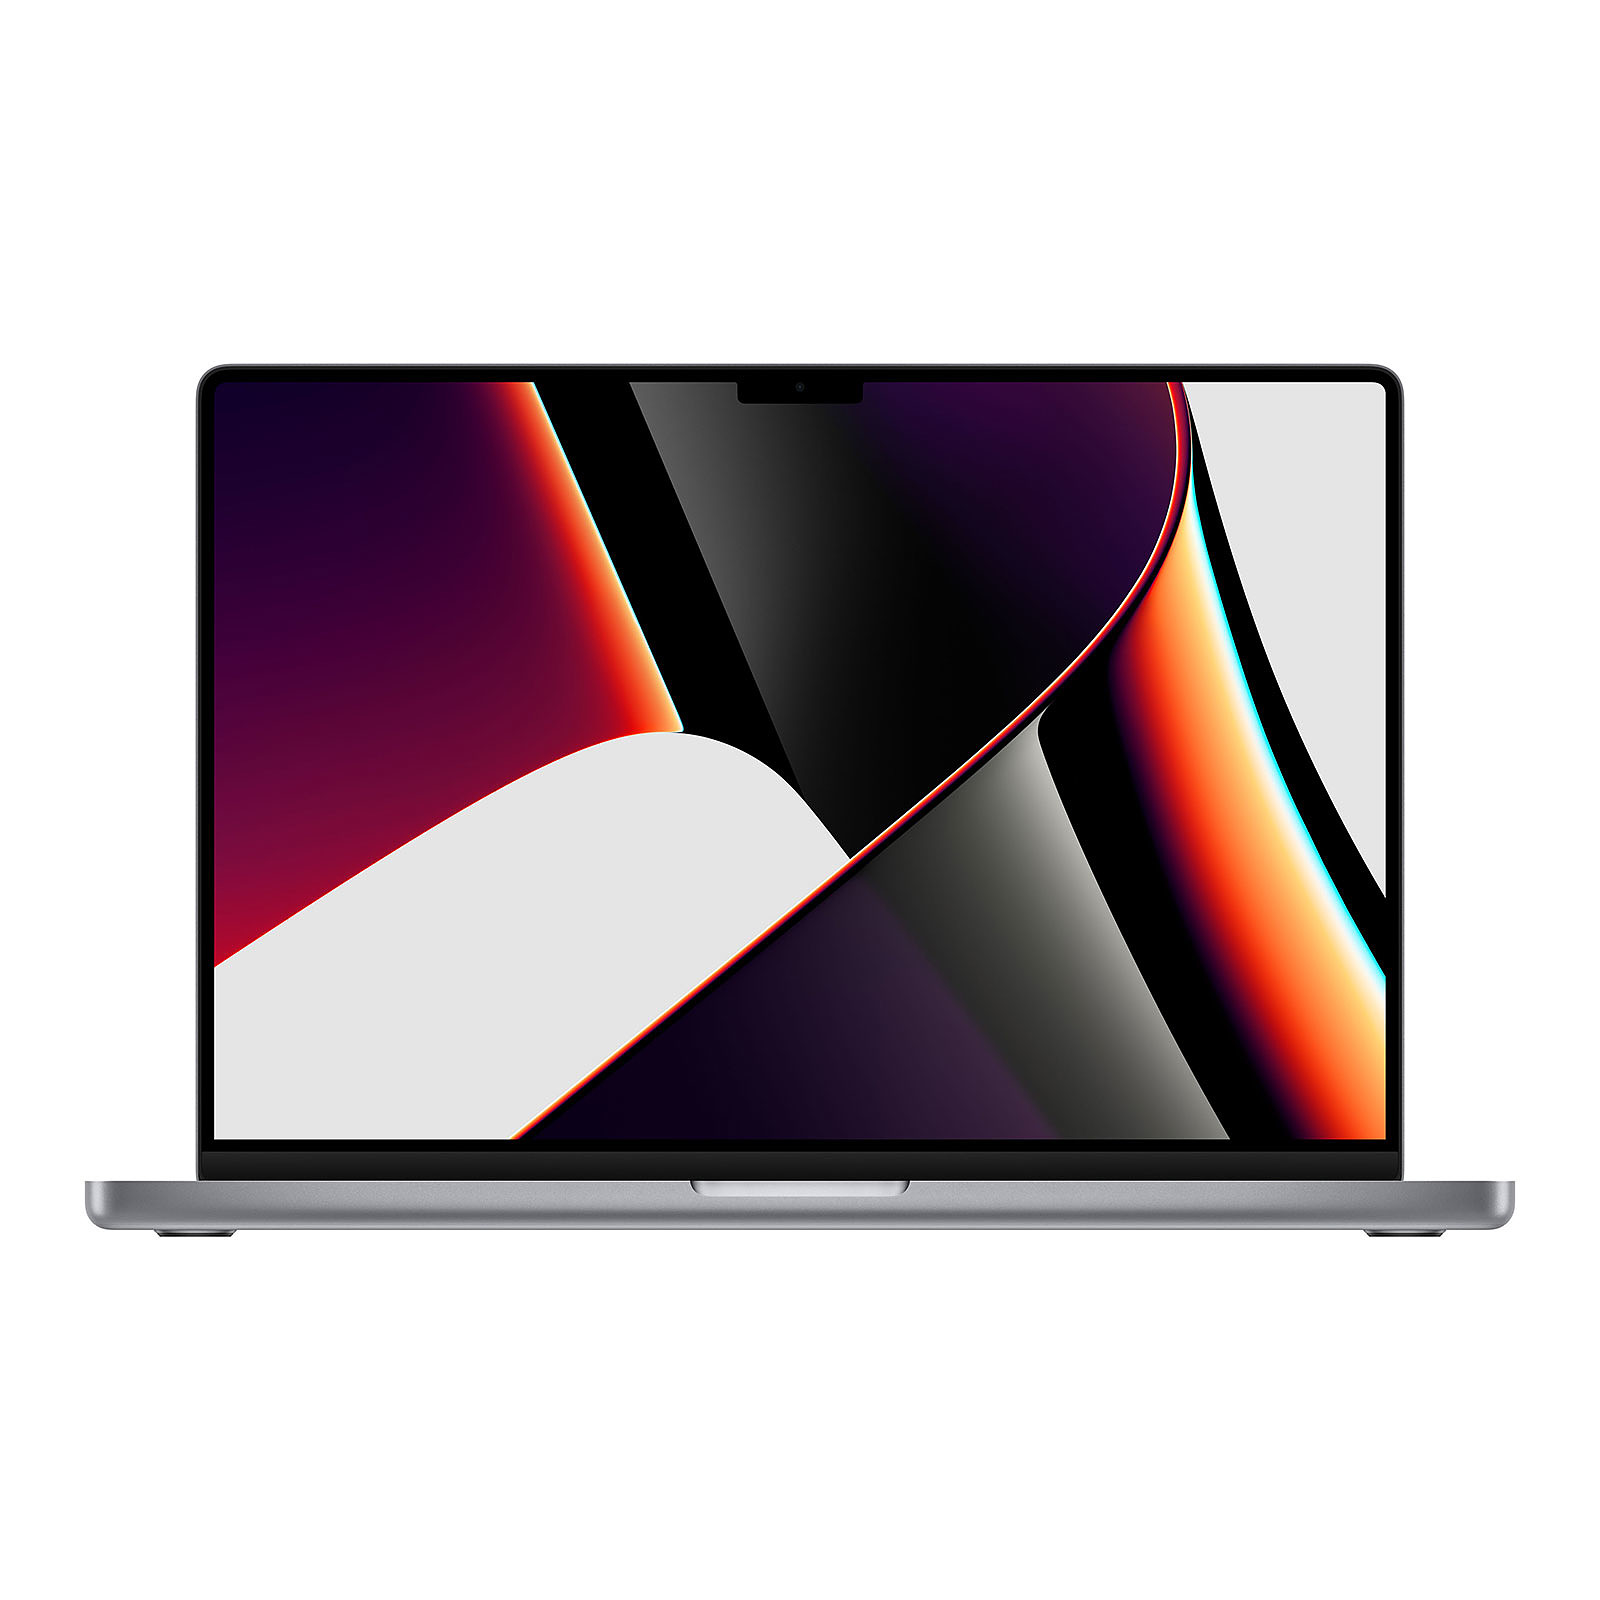 Apple MacBook Pro M1 Max (2021) 16" Gris sideral 32Go/1To (MK1A3FN/A-QWERTY) - MacBook Apple